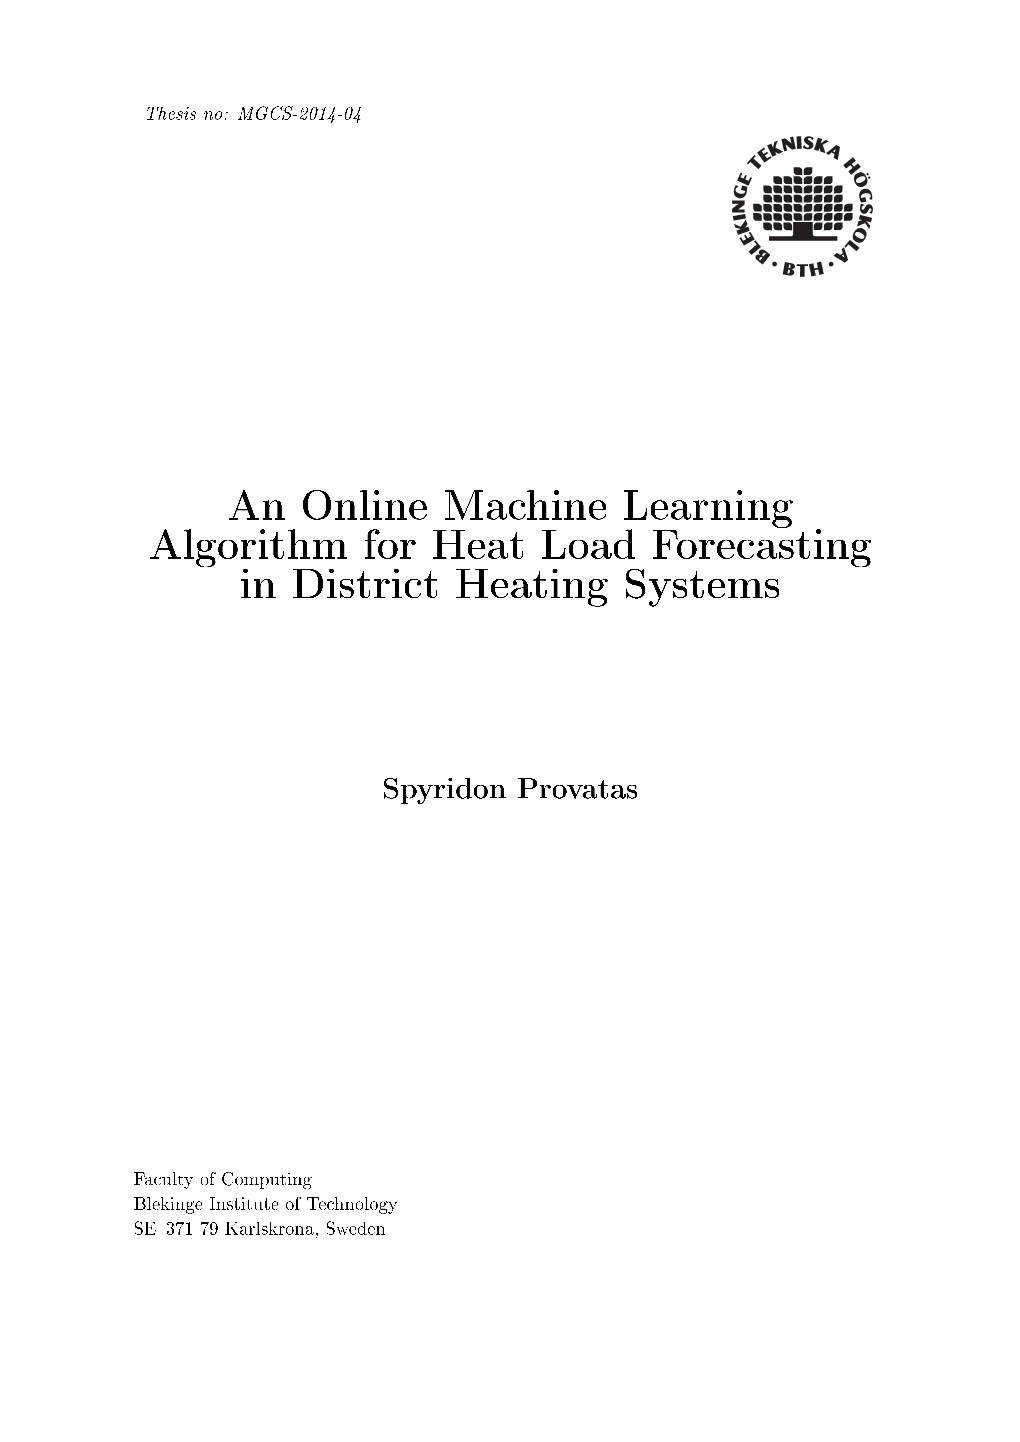 An Online Machine Learning Algorithm for Heat Load Forecasting in District Heating Systems